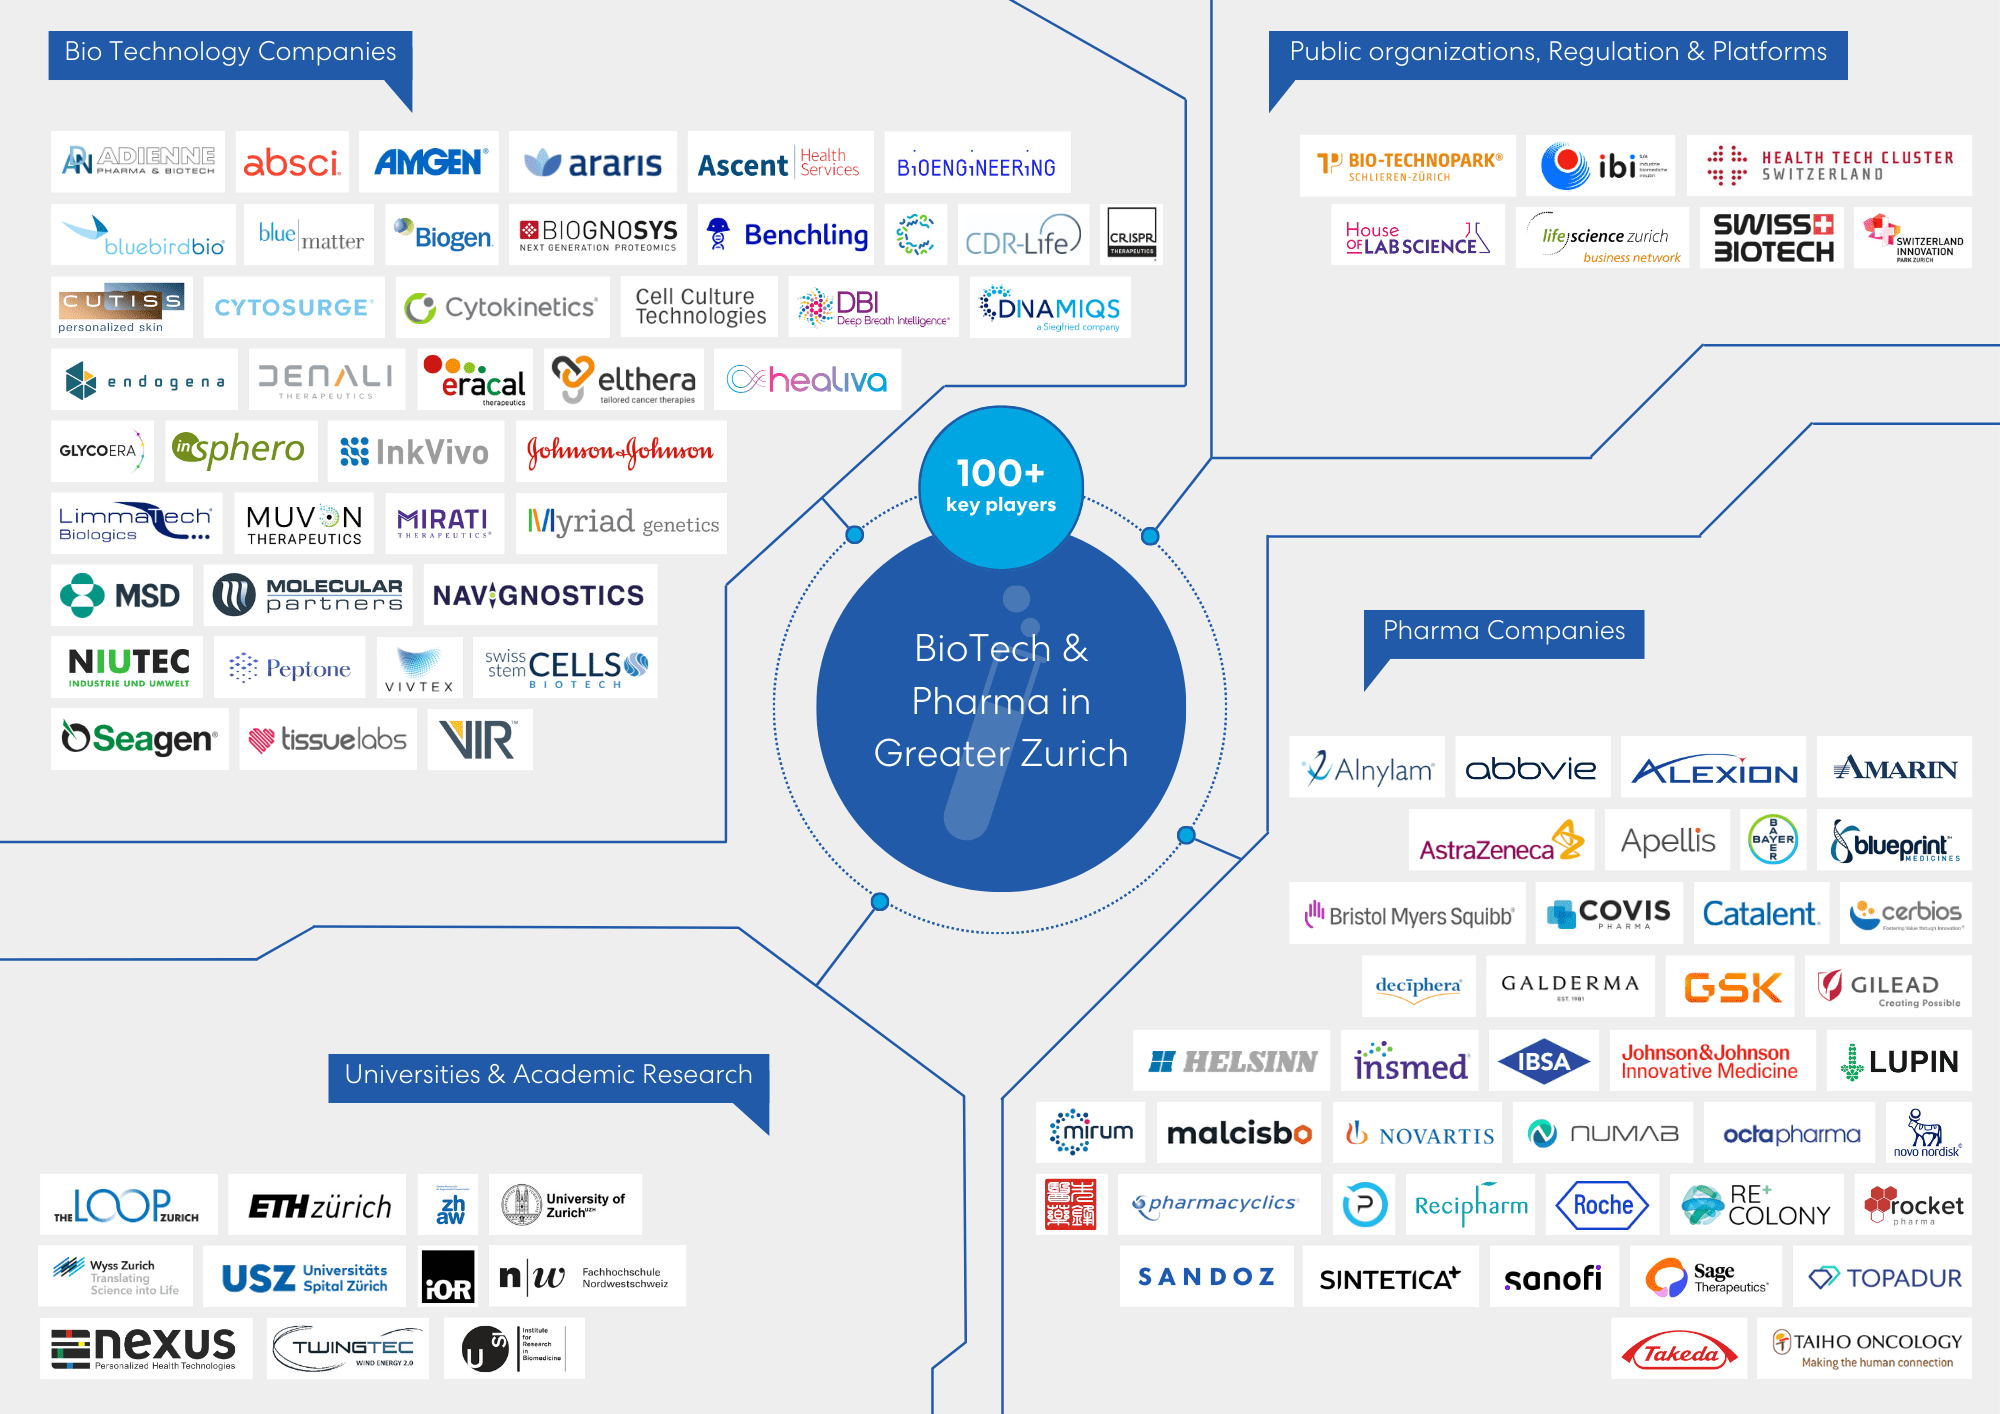 BioTech & Pharma companies in Greater Zurich ecosystem Map